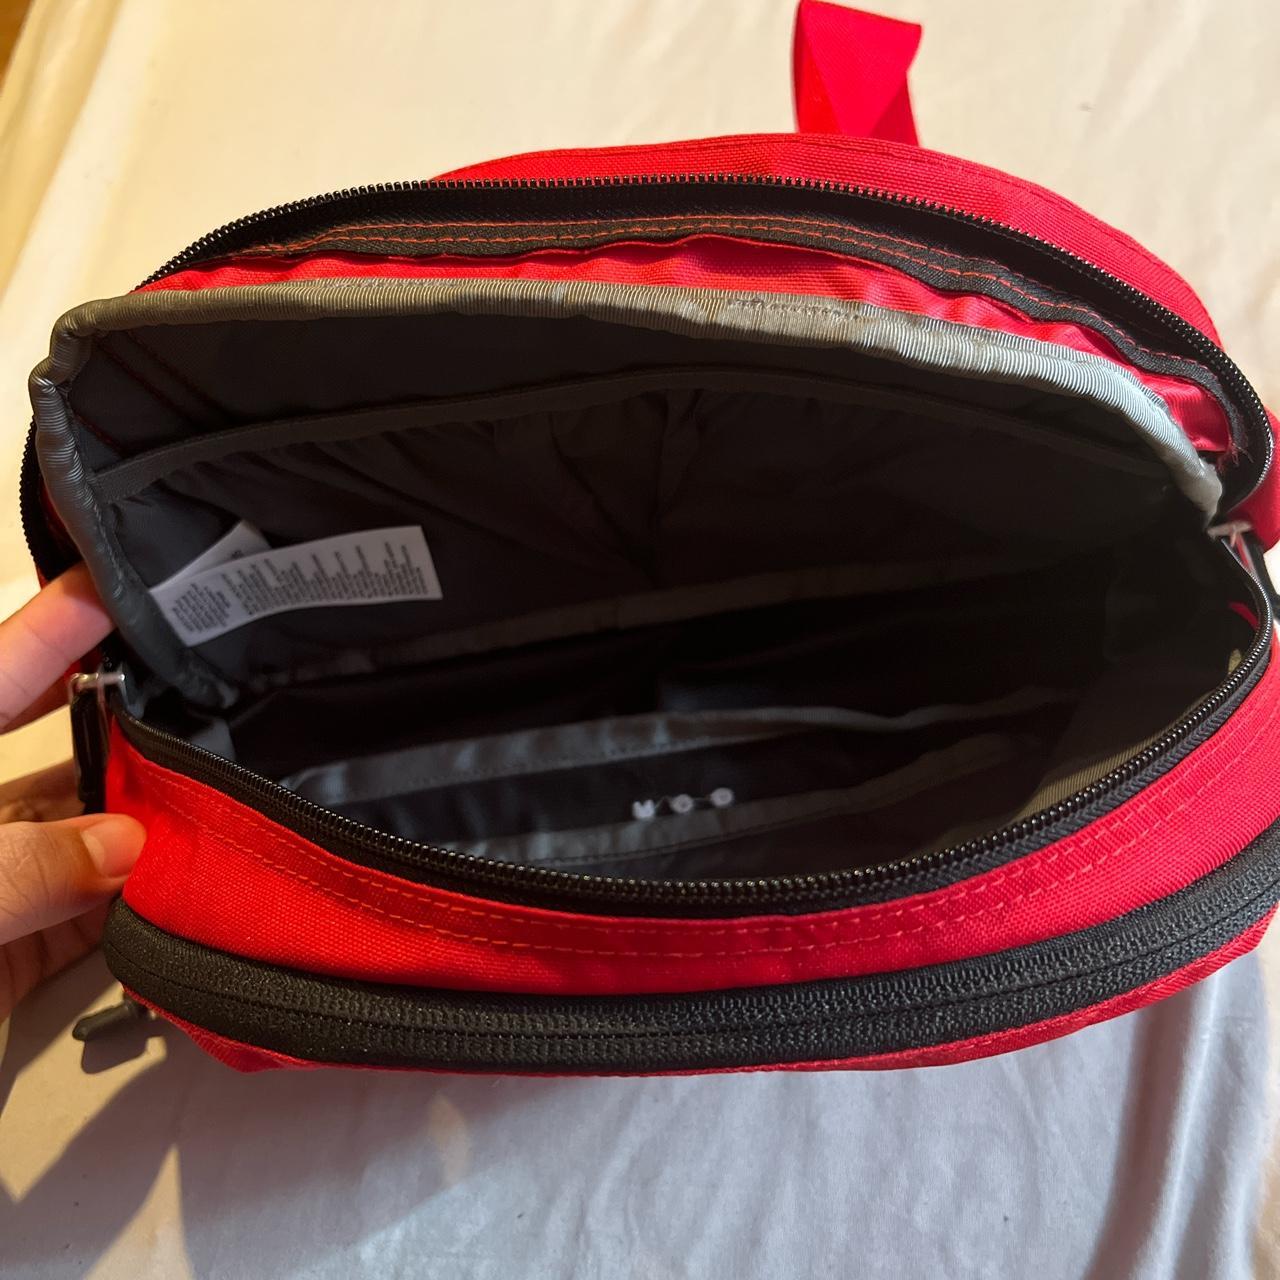 The North Face Men's Red and Black Bag (3)